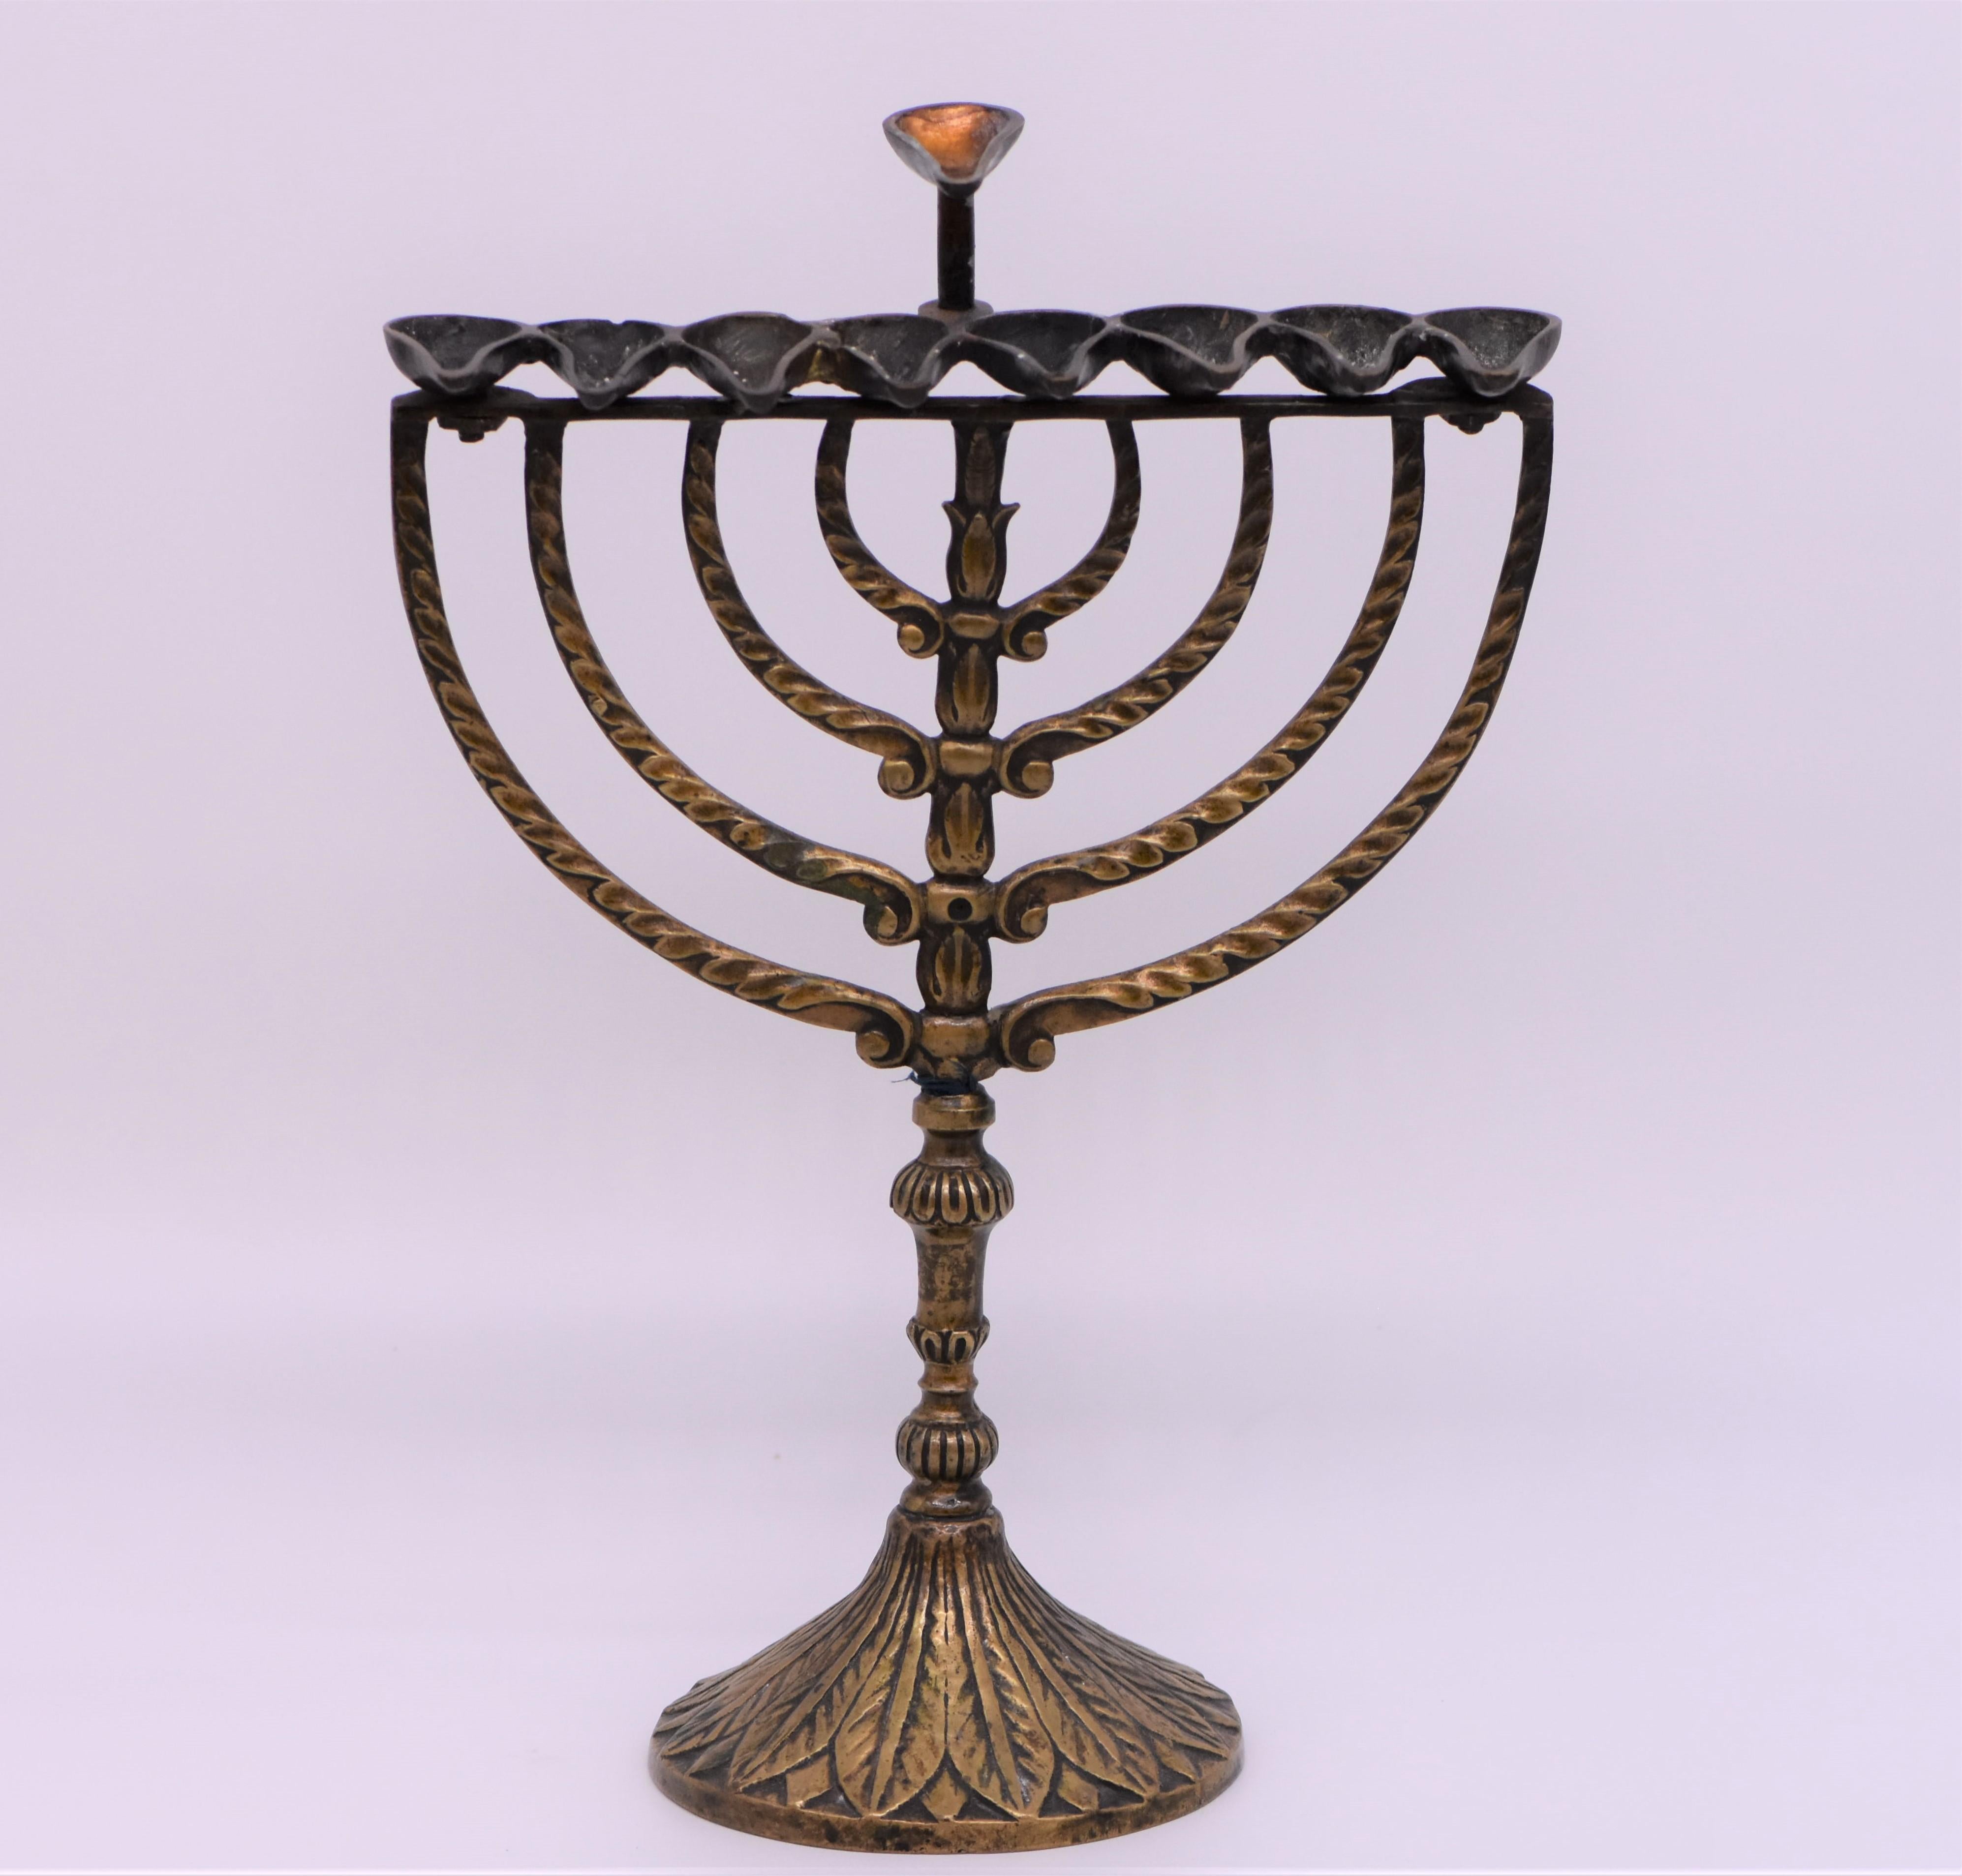 Rare bronze Hanukkah lamp Menorah, Italy, circa 1750. 
On round decorated base with baluster shape stem. 
The upper portion constructed with eight semicircle arms support eight oil fonts and one servant light.
This Hanukkah lamp is cast in the